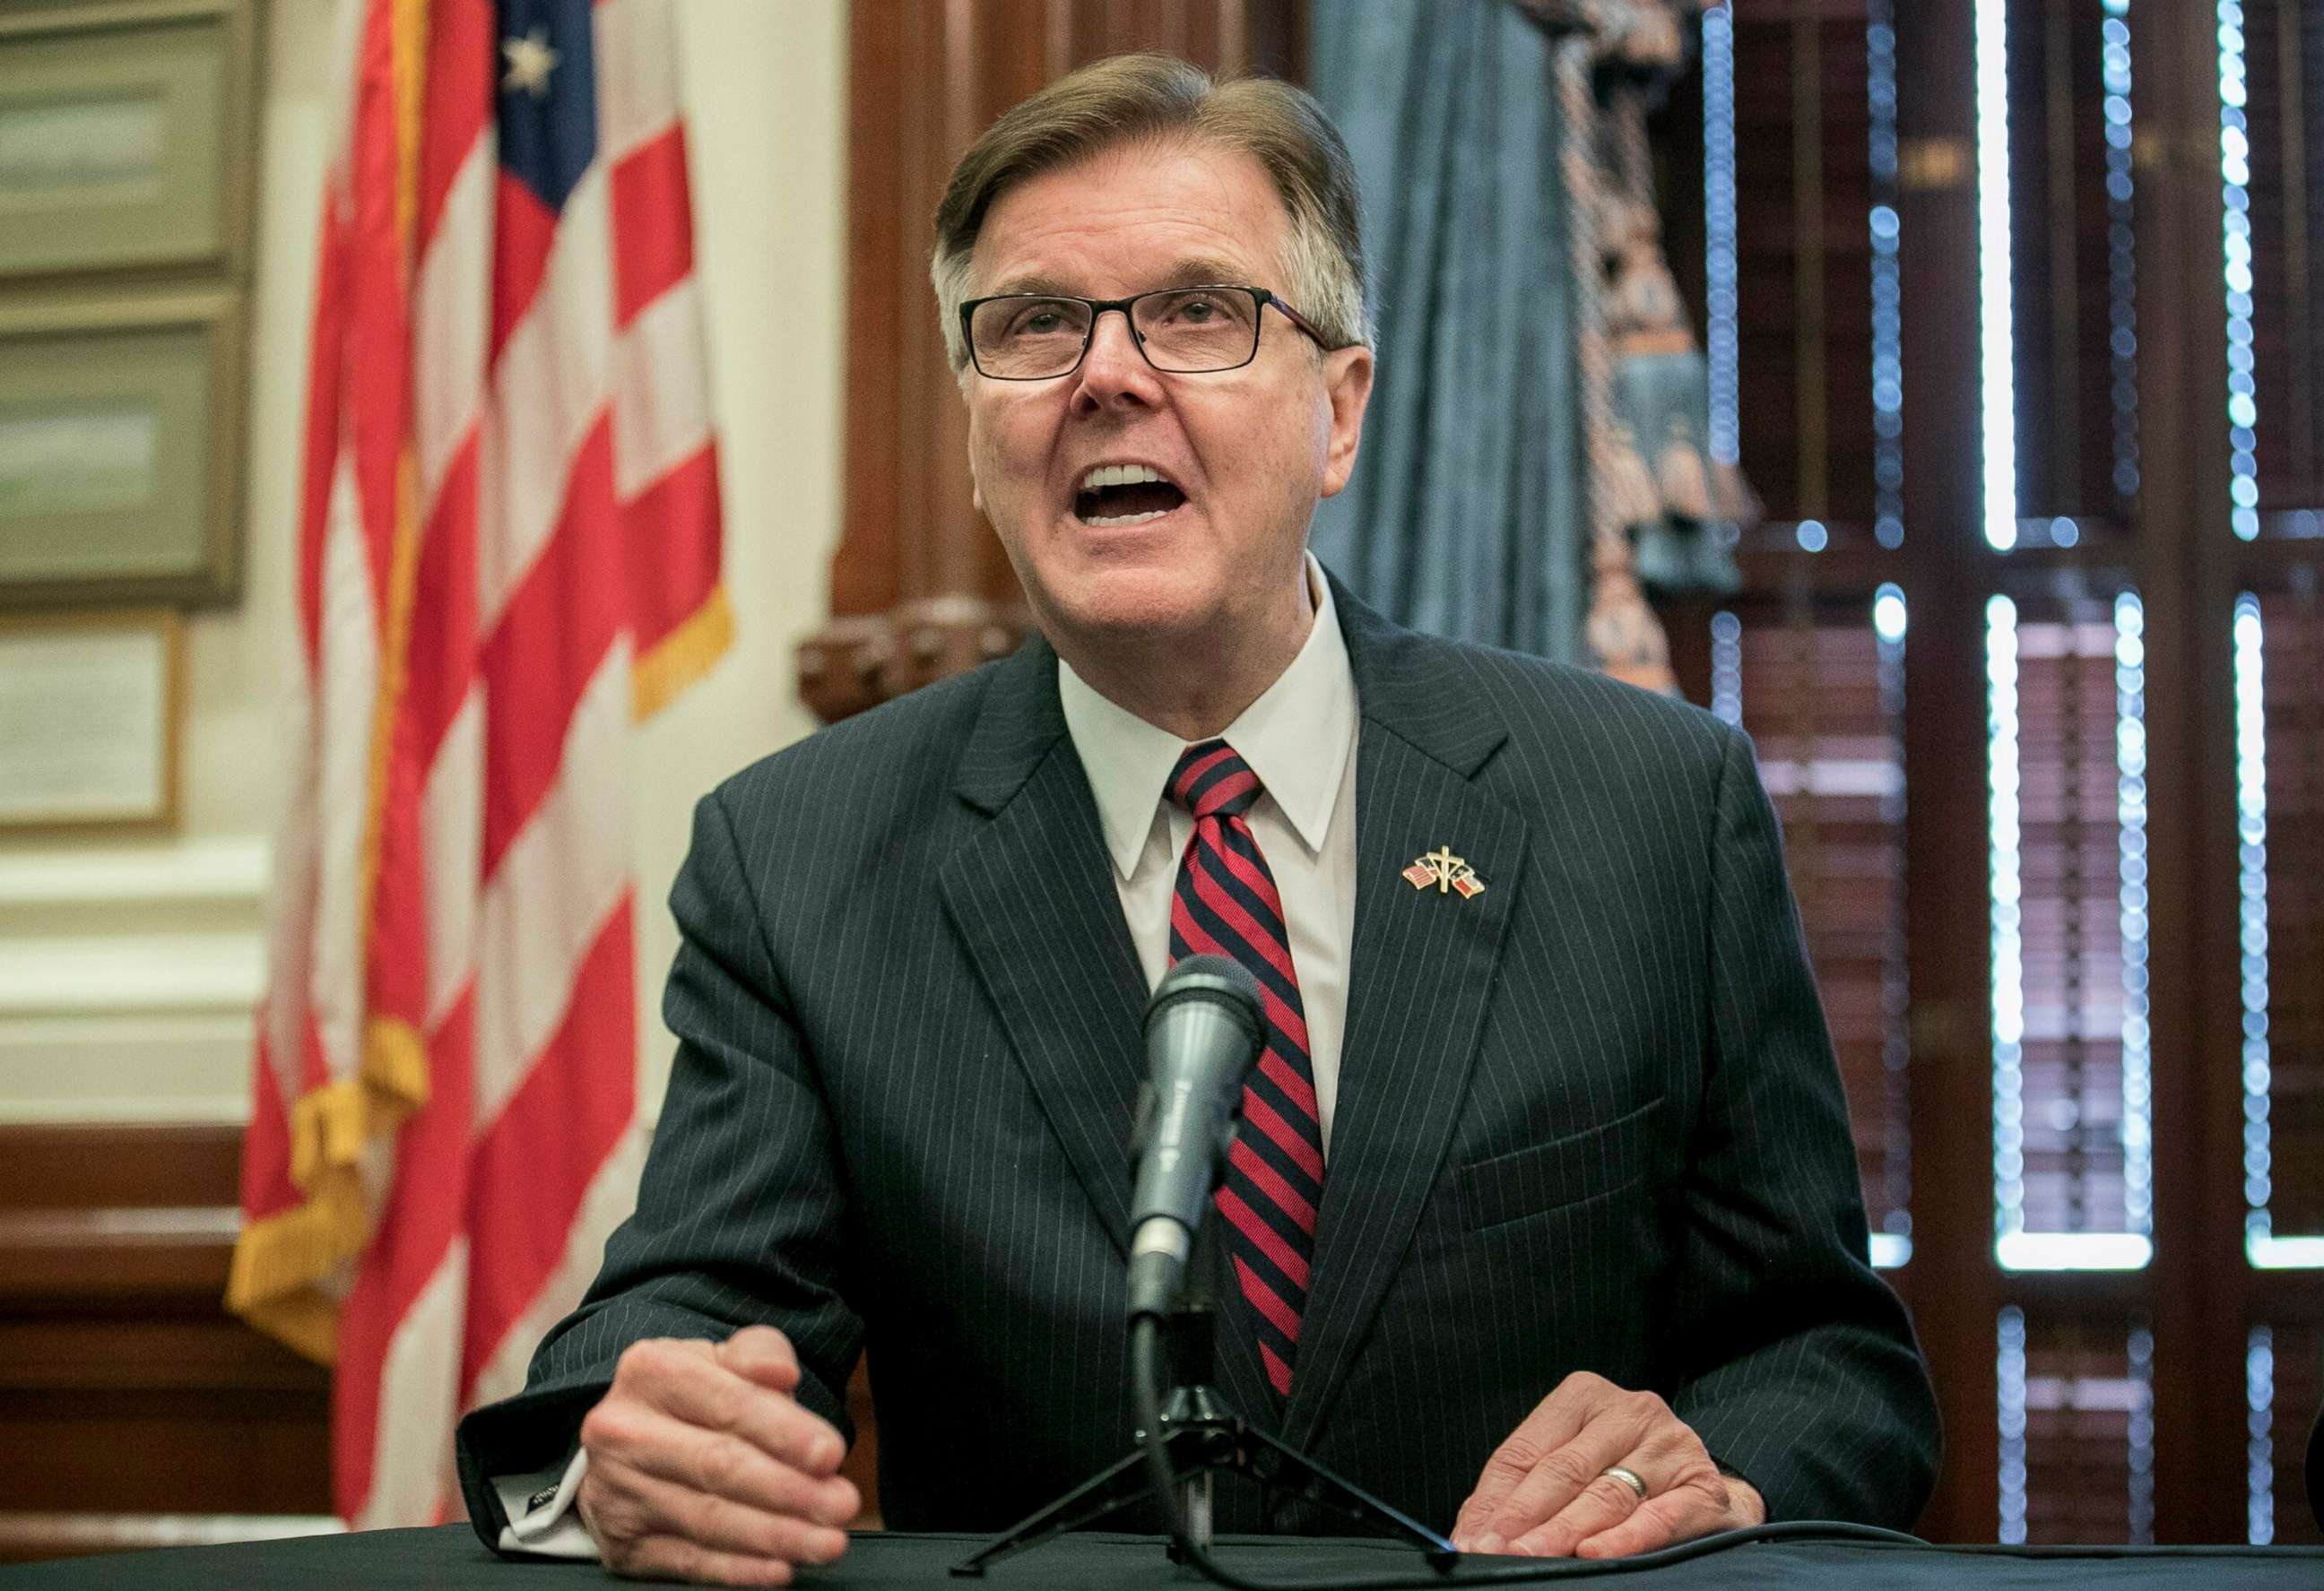 PHOTO: Dan Patrick talks about a deployment of National Guard troops to the Texas-Mexico border at a news conference at the Capitol, Friday June 21, 2019 in Austin, Texas.